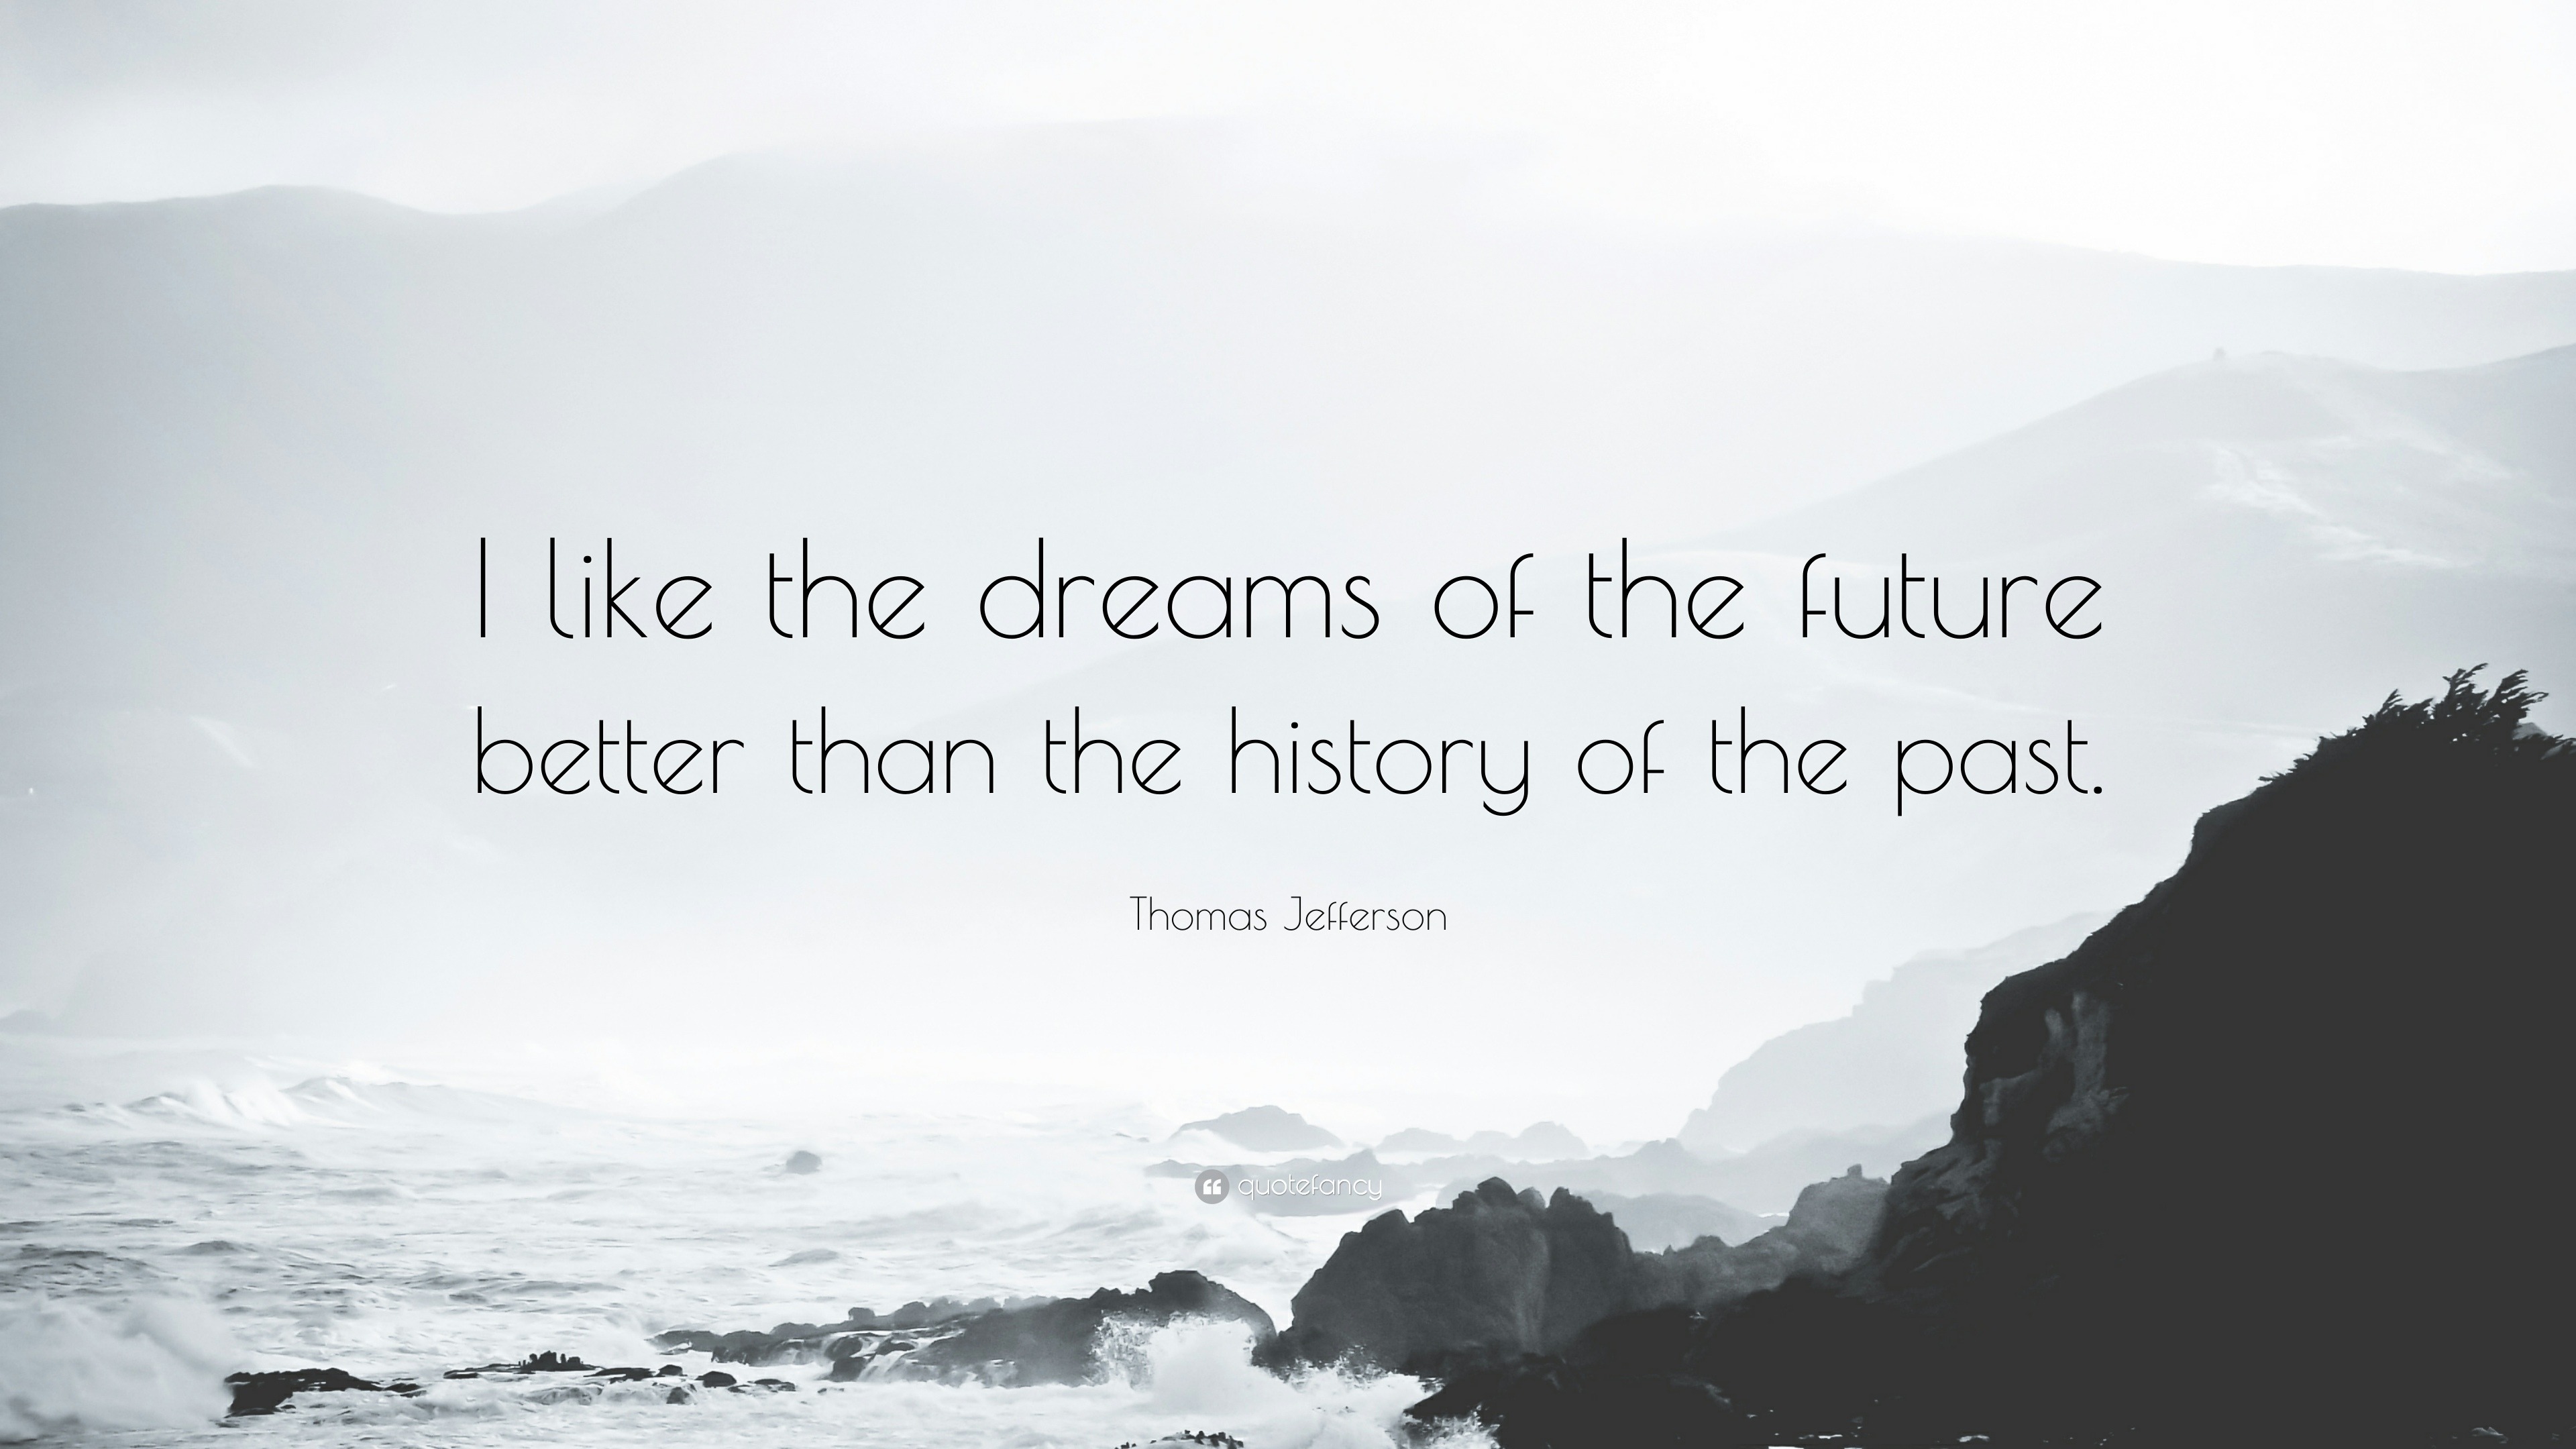 Thomas Jefferson Quote: “I like the dreams of the future better than the history of the